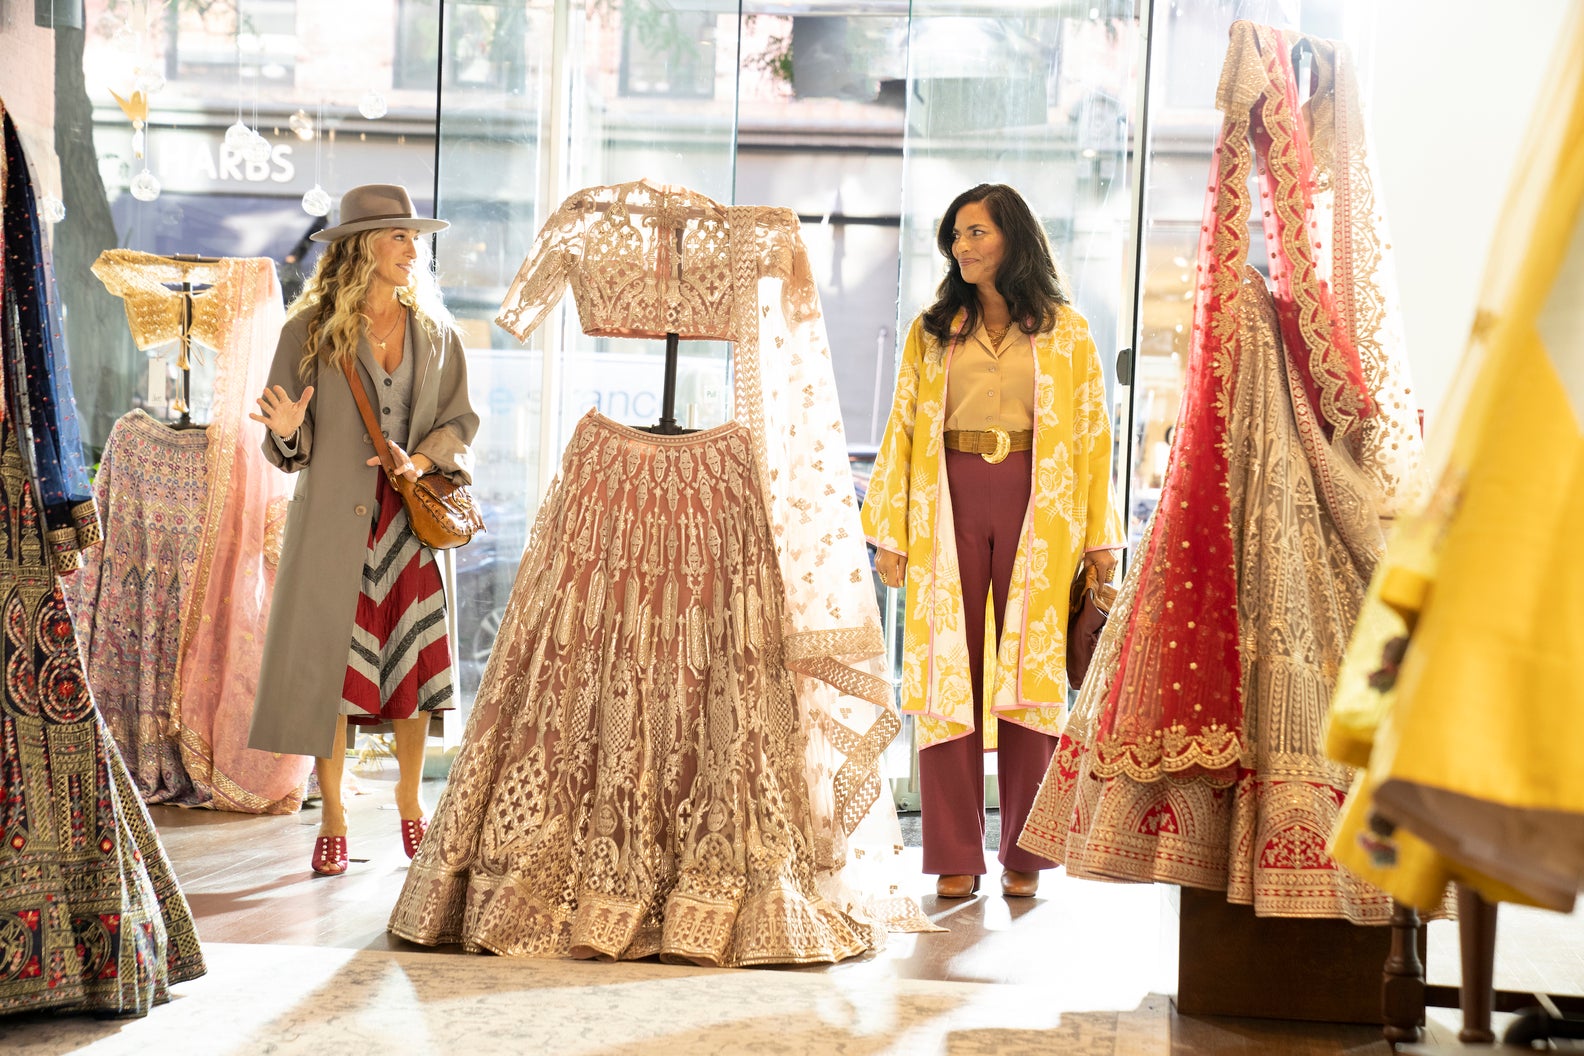 Carrie and Seema go to a ‘sari’ shop which has only lehengas